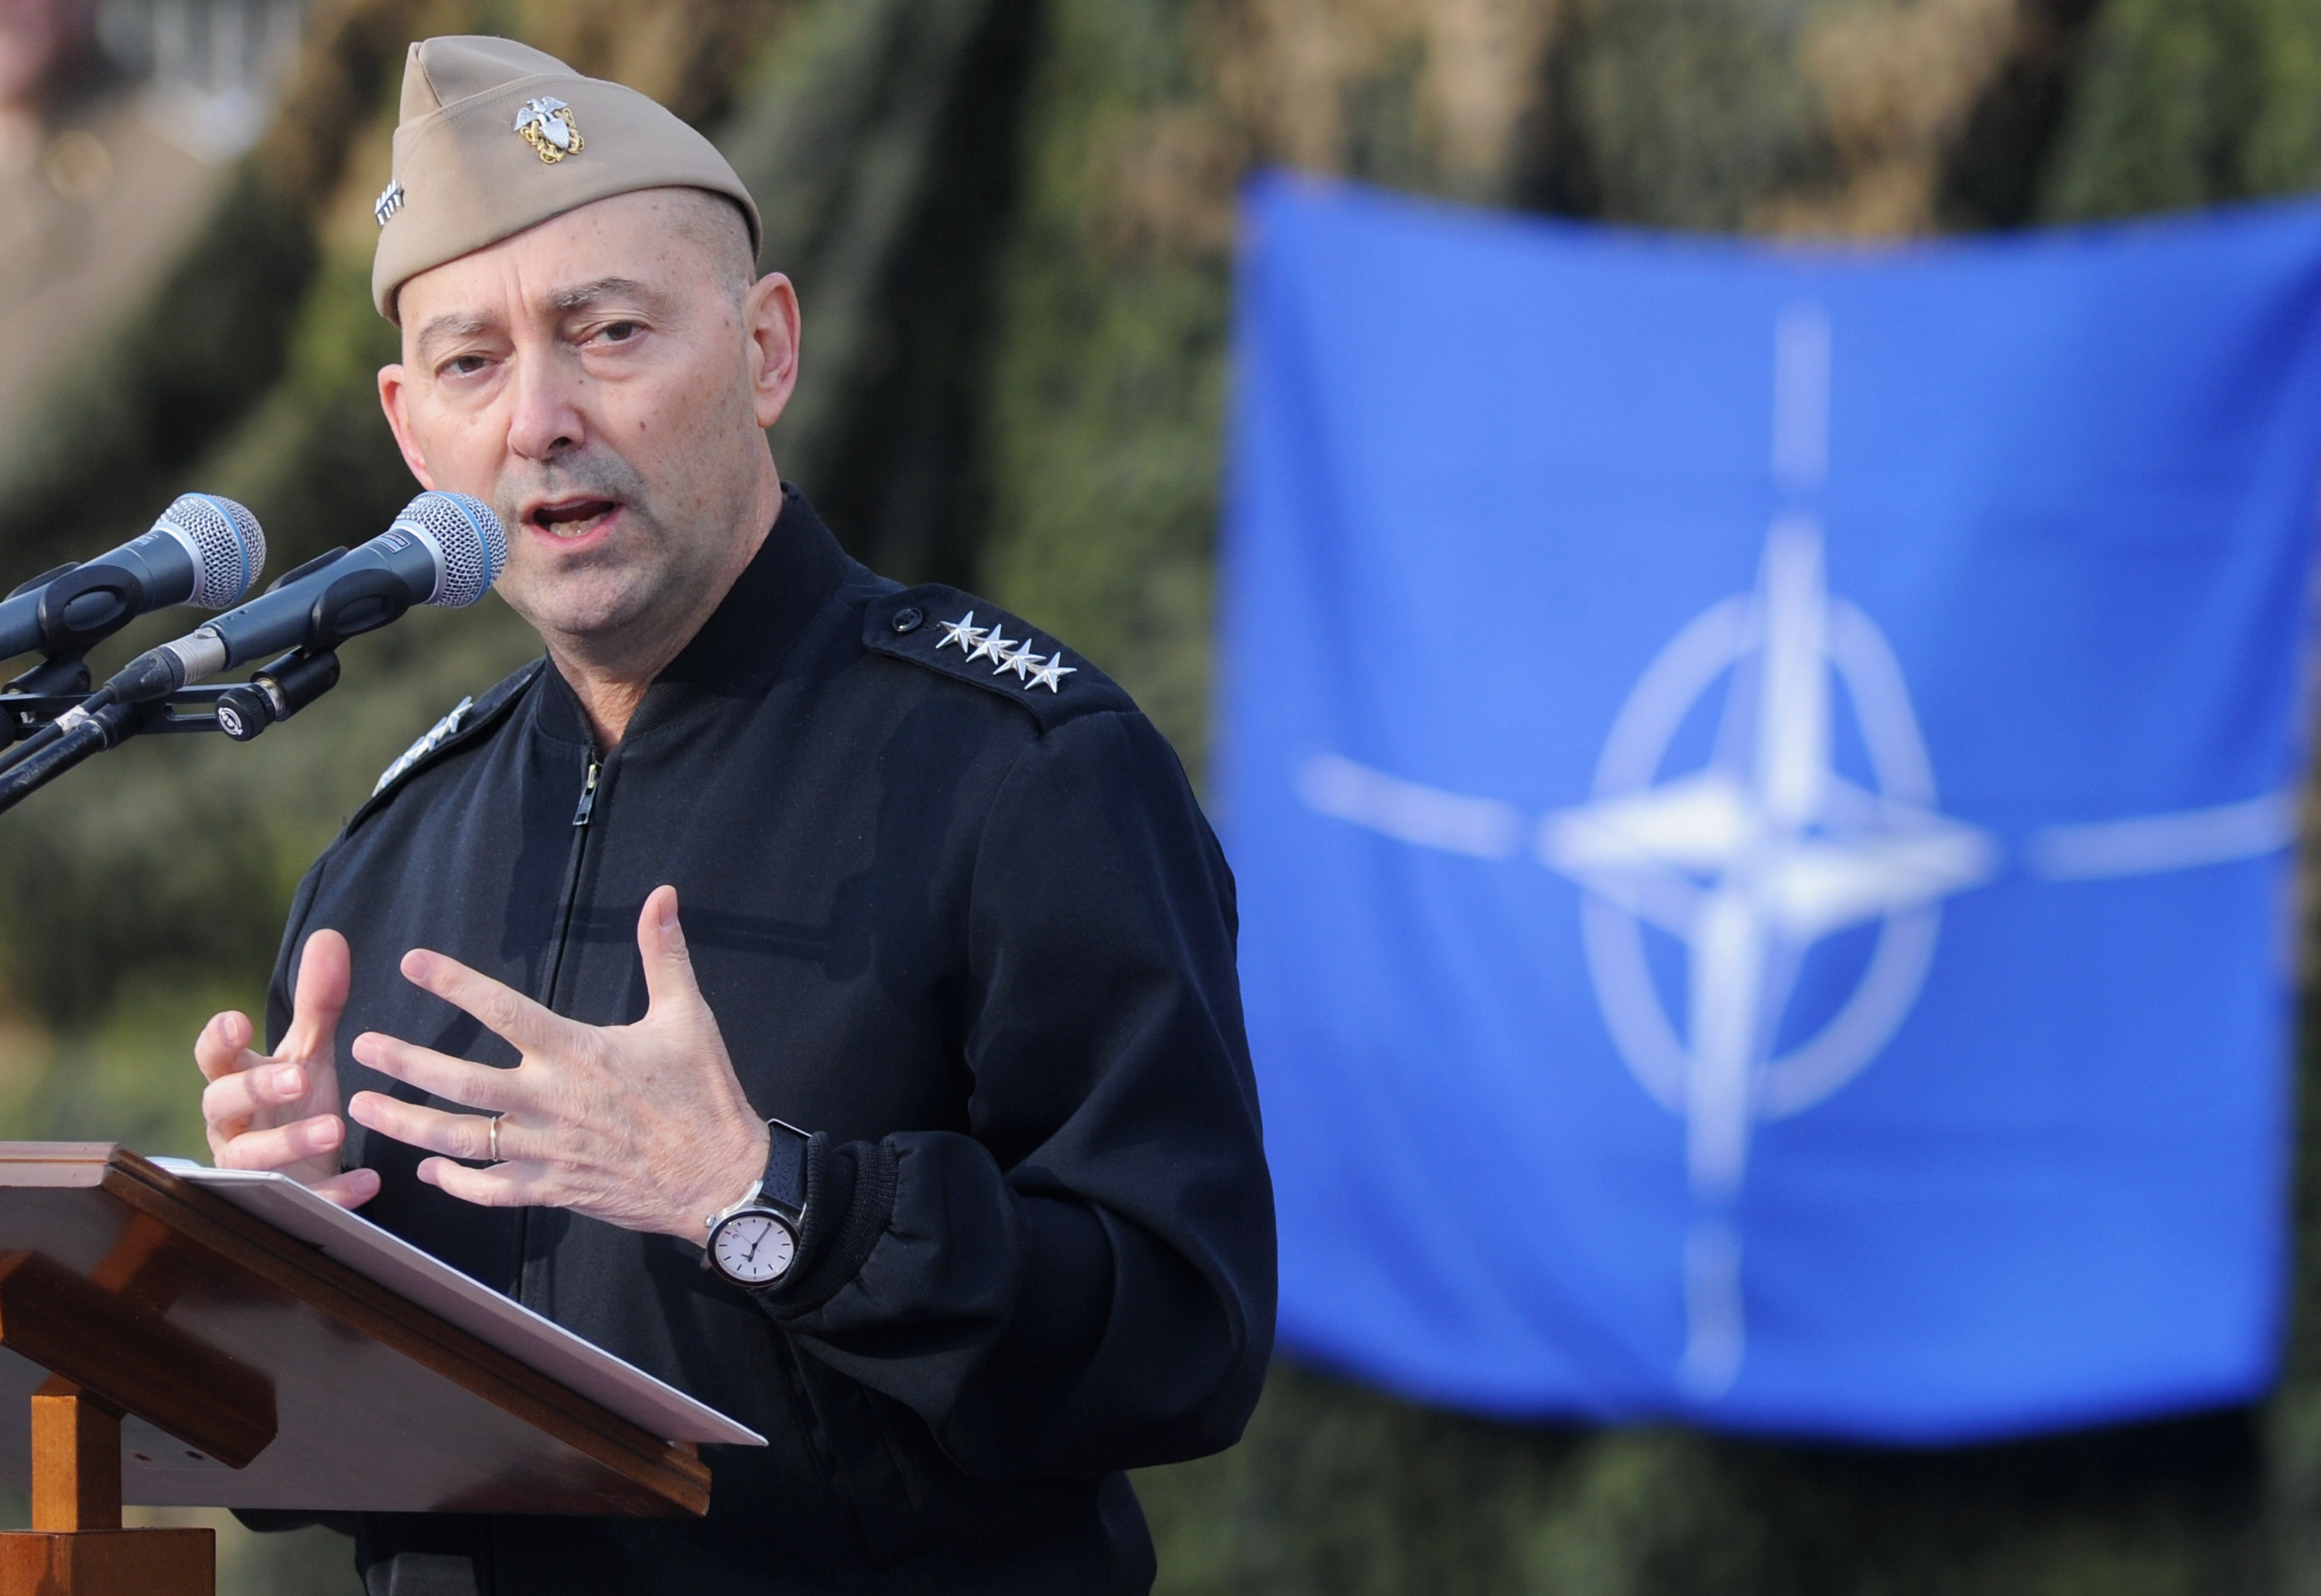 Supreme Allied Commander Europe (SACEUR) Admiral James Stavridis makes a speech at the departure ceremony for OTAN Rapid Deployable Corps - Italy bound for Afghanistan at Ugo Mara Barracks in Solbiate Olona, Italy, on Jan. 10, 2013.